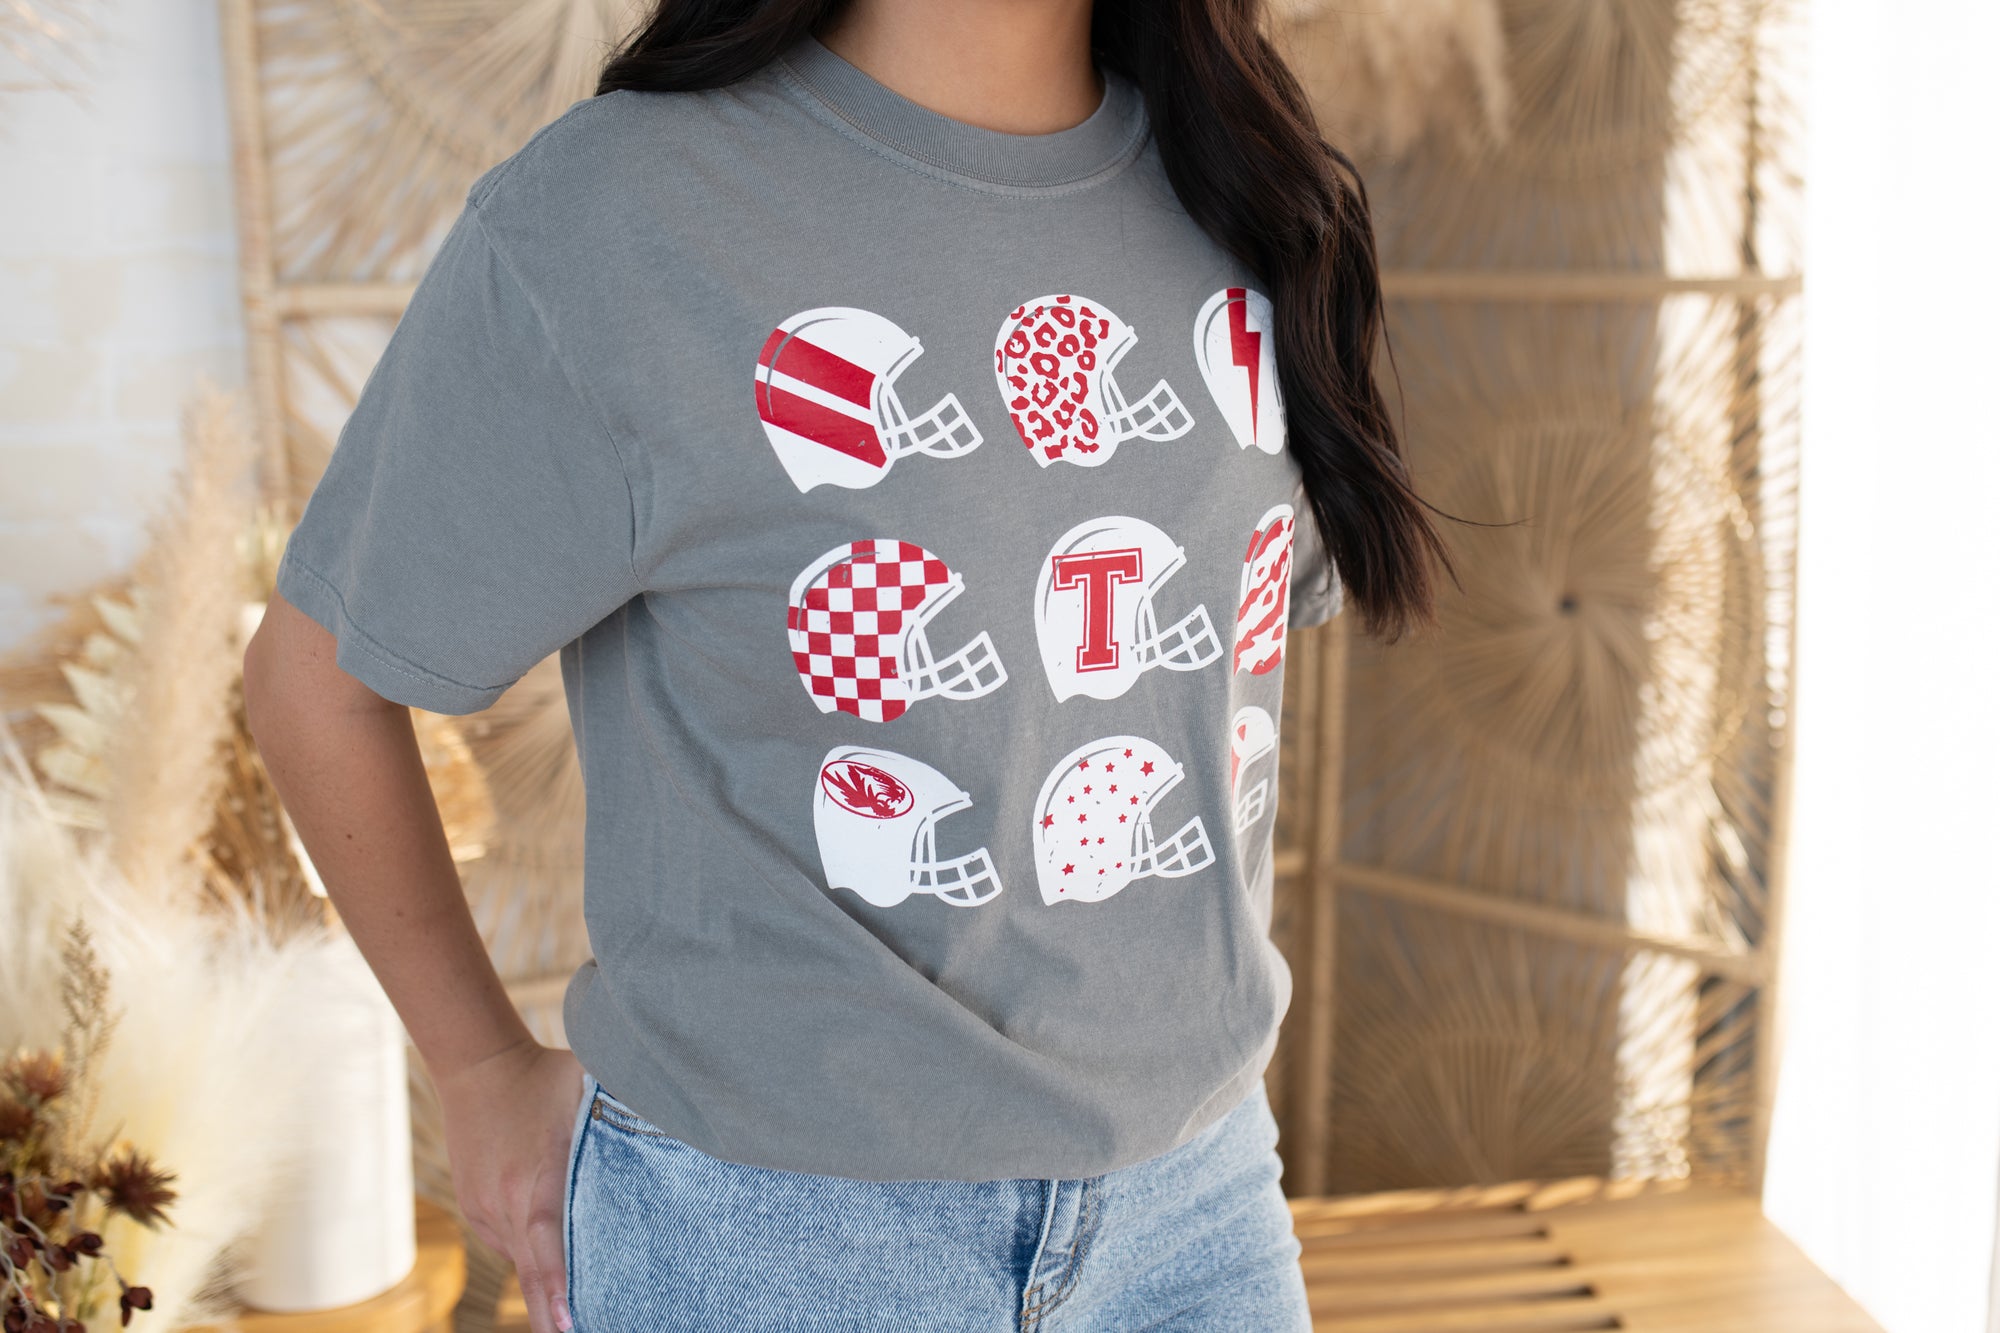 Tuttle Graphic Tee-Grey, Red & White